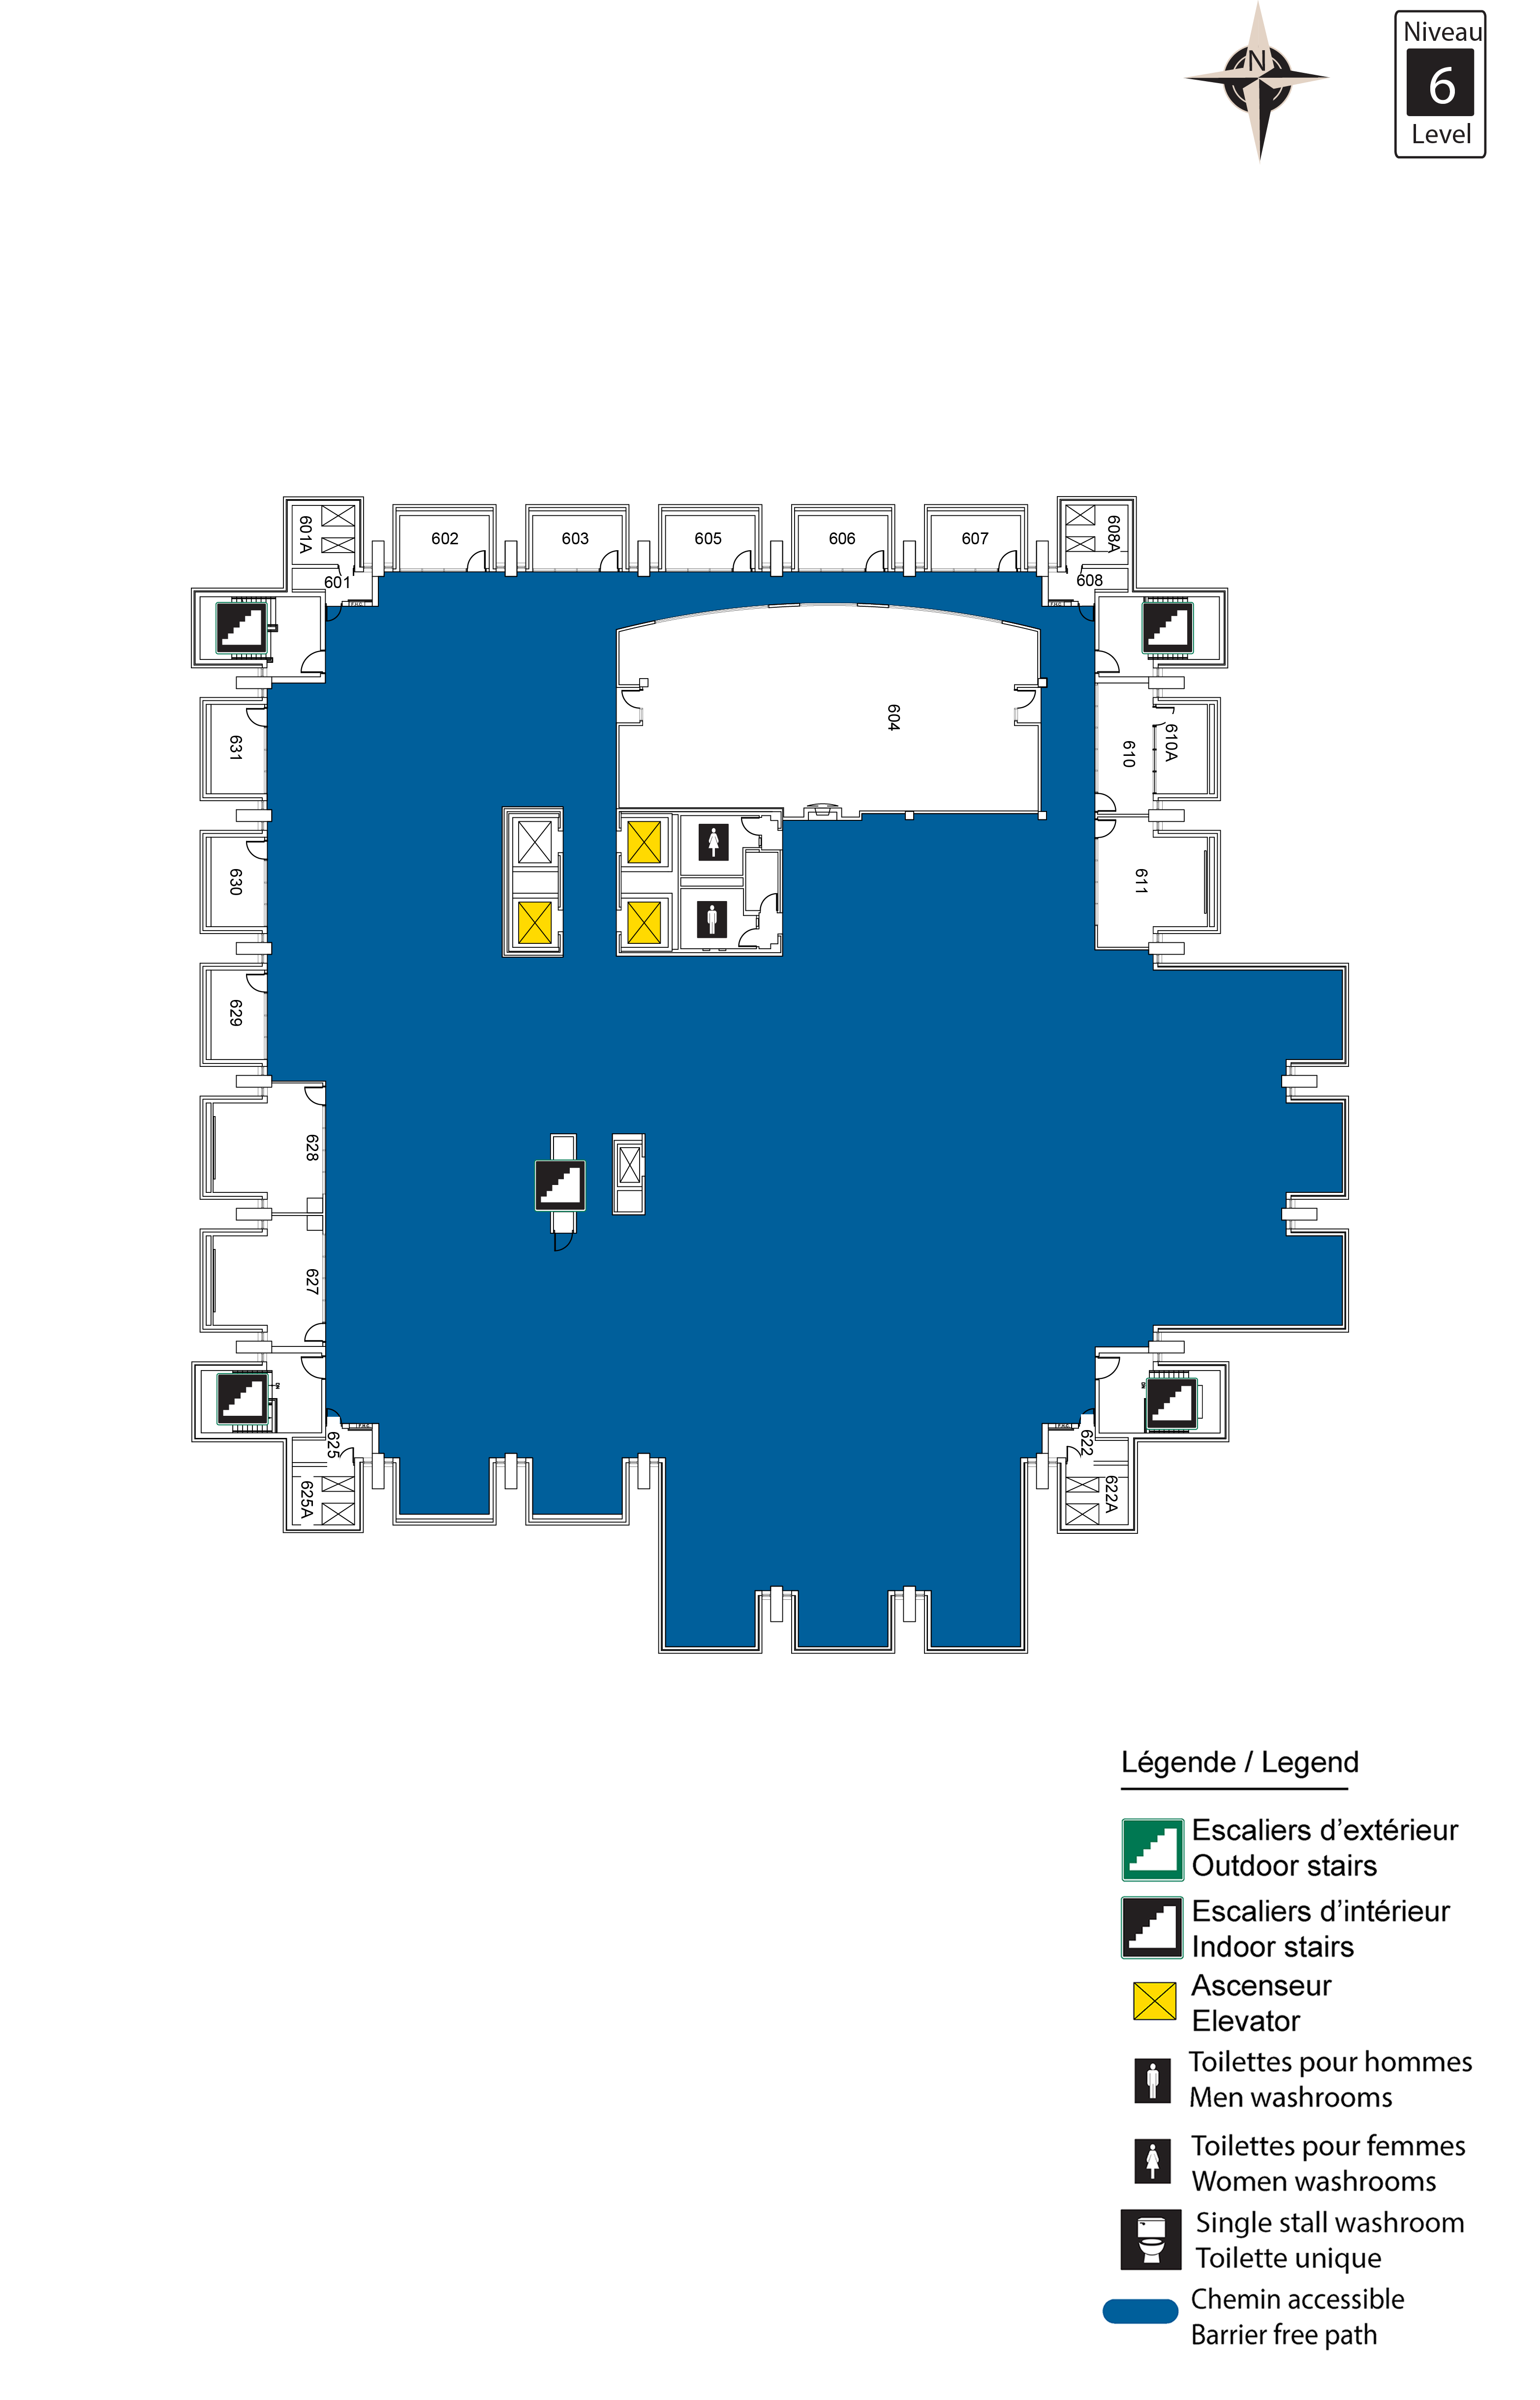 Accessible map of Morisset level 6